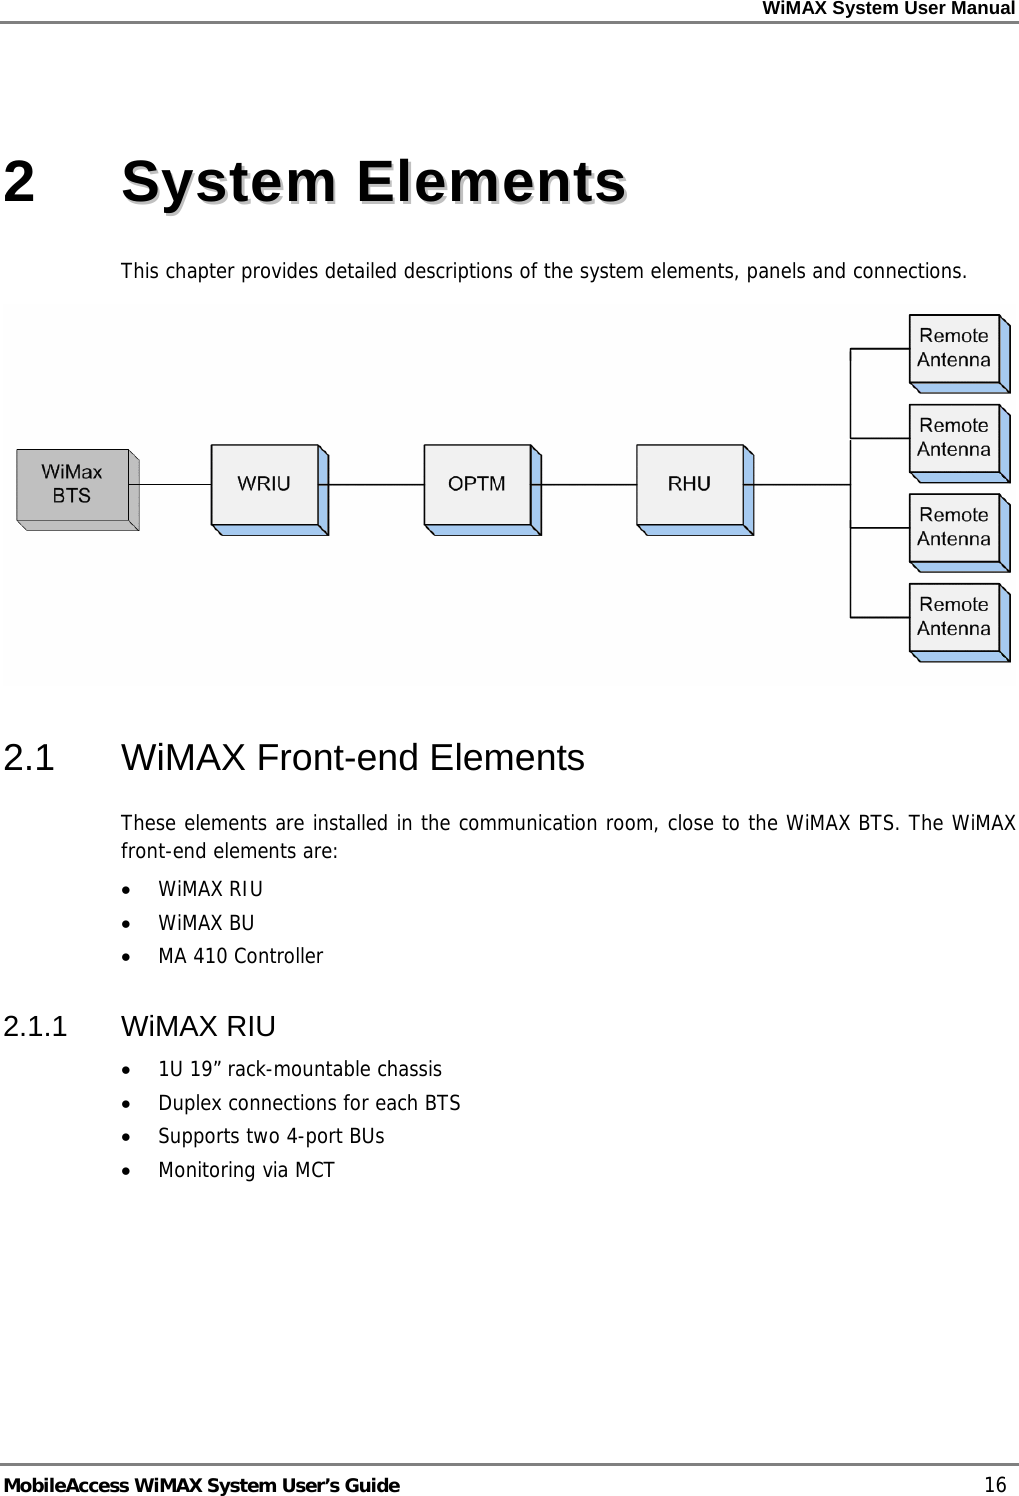 WiMAX System User Manual     MobileAccess WiMAX System User’s Guide    16 2   SSyysstteemm  EElleemmeennttss  This chapter provides detailed descriptions of the system elements, panels and connections.   2.1  WiMAX Front-end Elements These elements are installed in the communication room, close to the WiMAX BTS. The WiMAX front-end elements are: • WiMAX RIU • WiMAX BU • MA 410 Controller 2.1.1 WiMAX RIU • 1U 19” rack-mountable chassis • Duplex connections for each BTS • Supports two 4-port BUs • Monitoring via MCT 